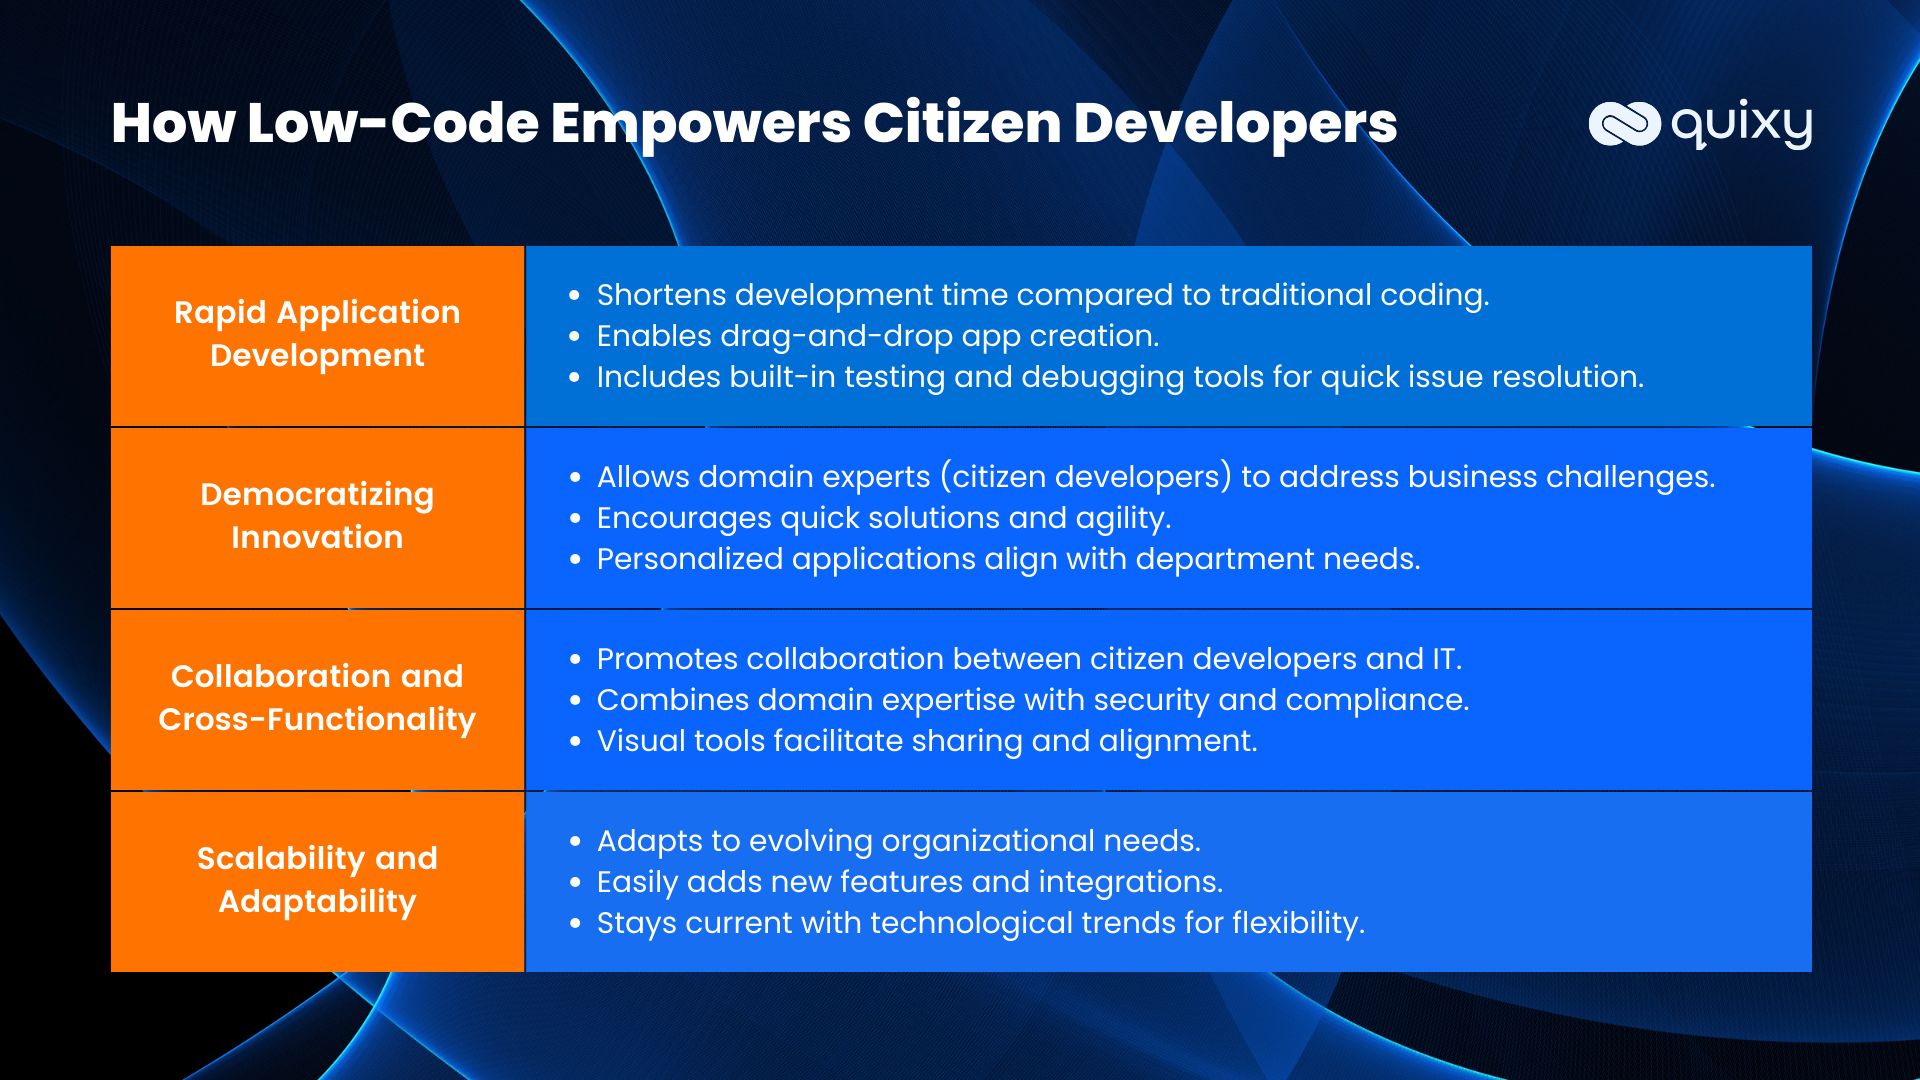 How Low-Code Empowers Citizen Developers